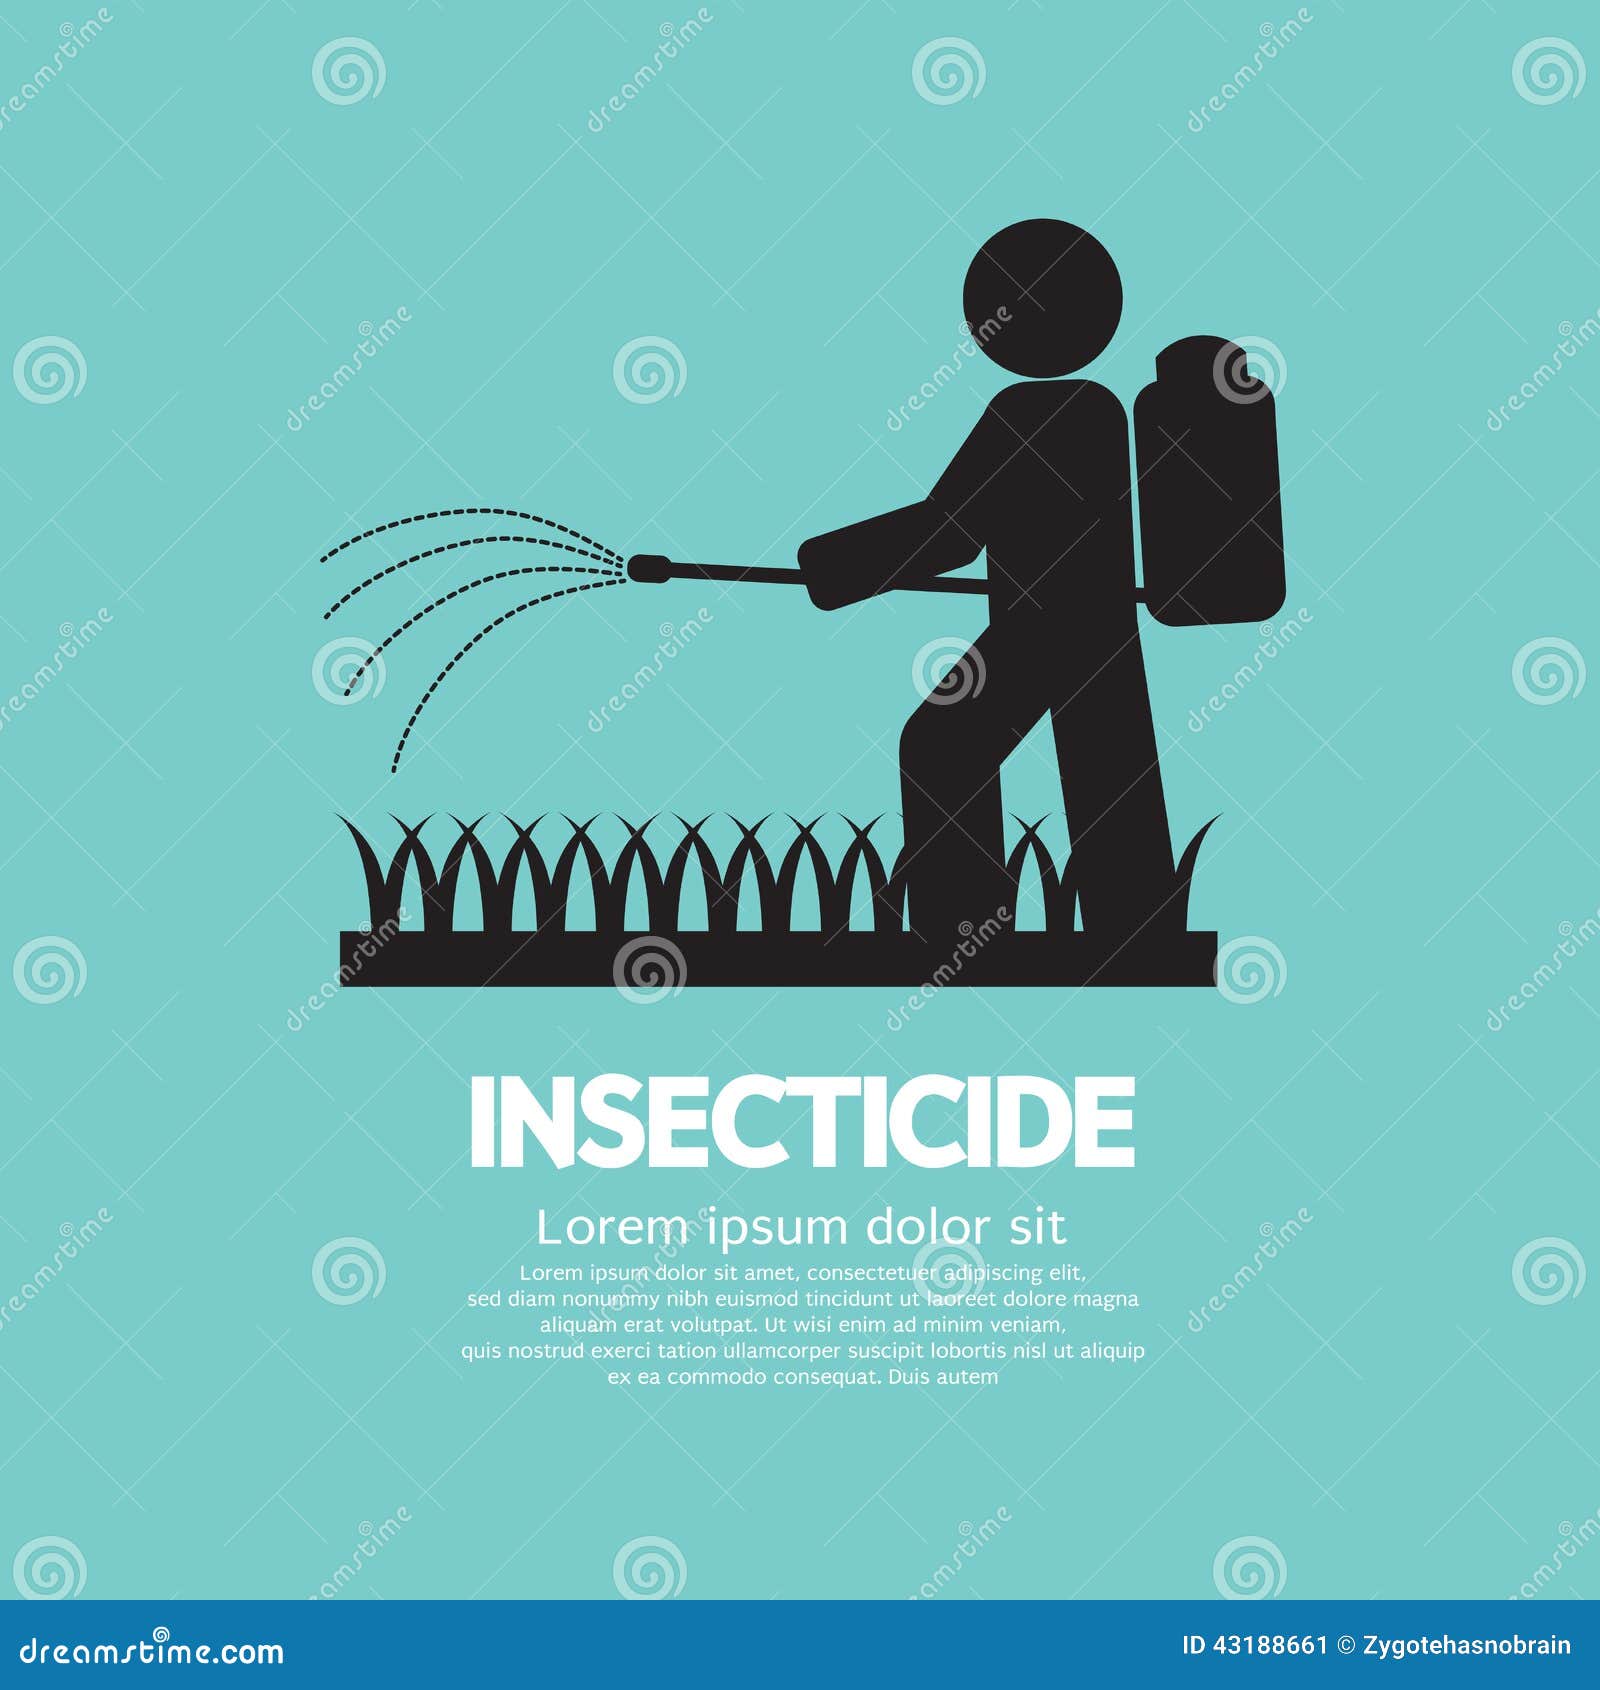 human spraying insecticide